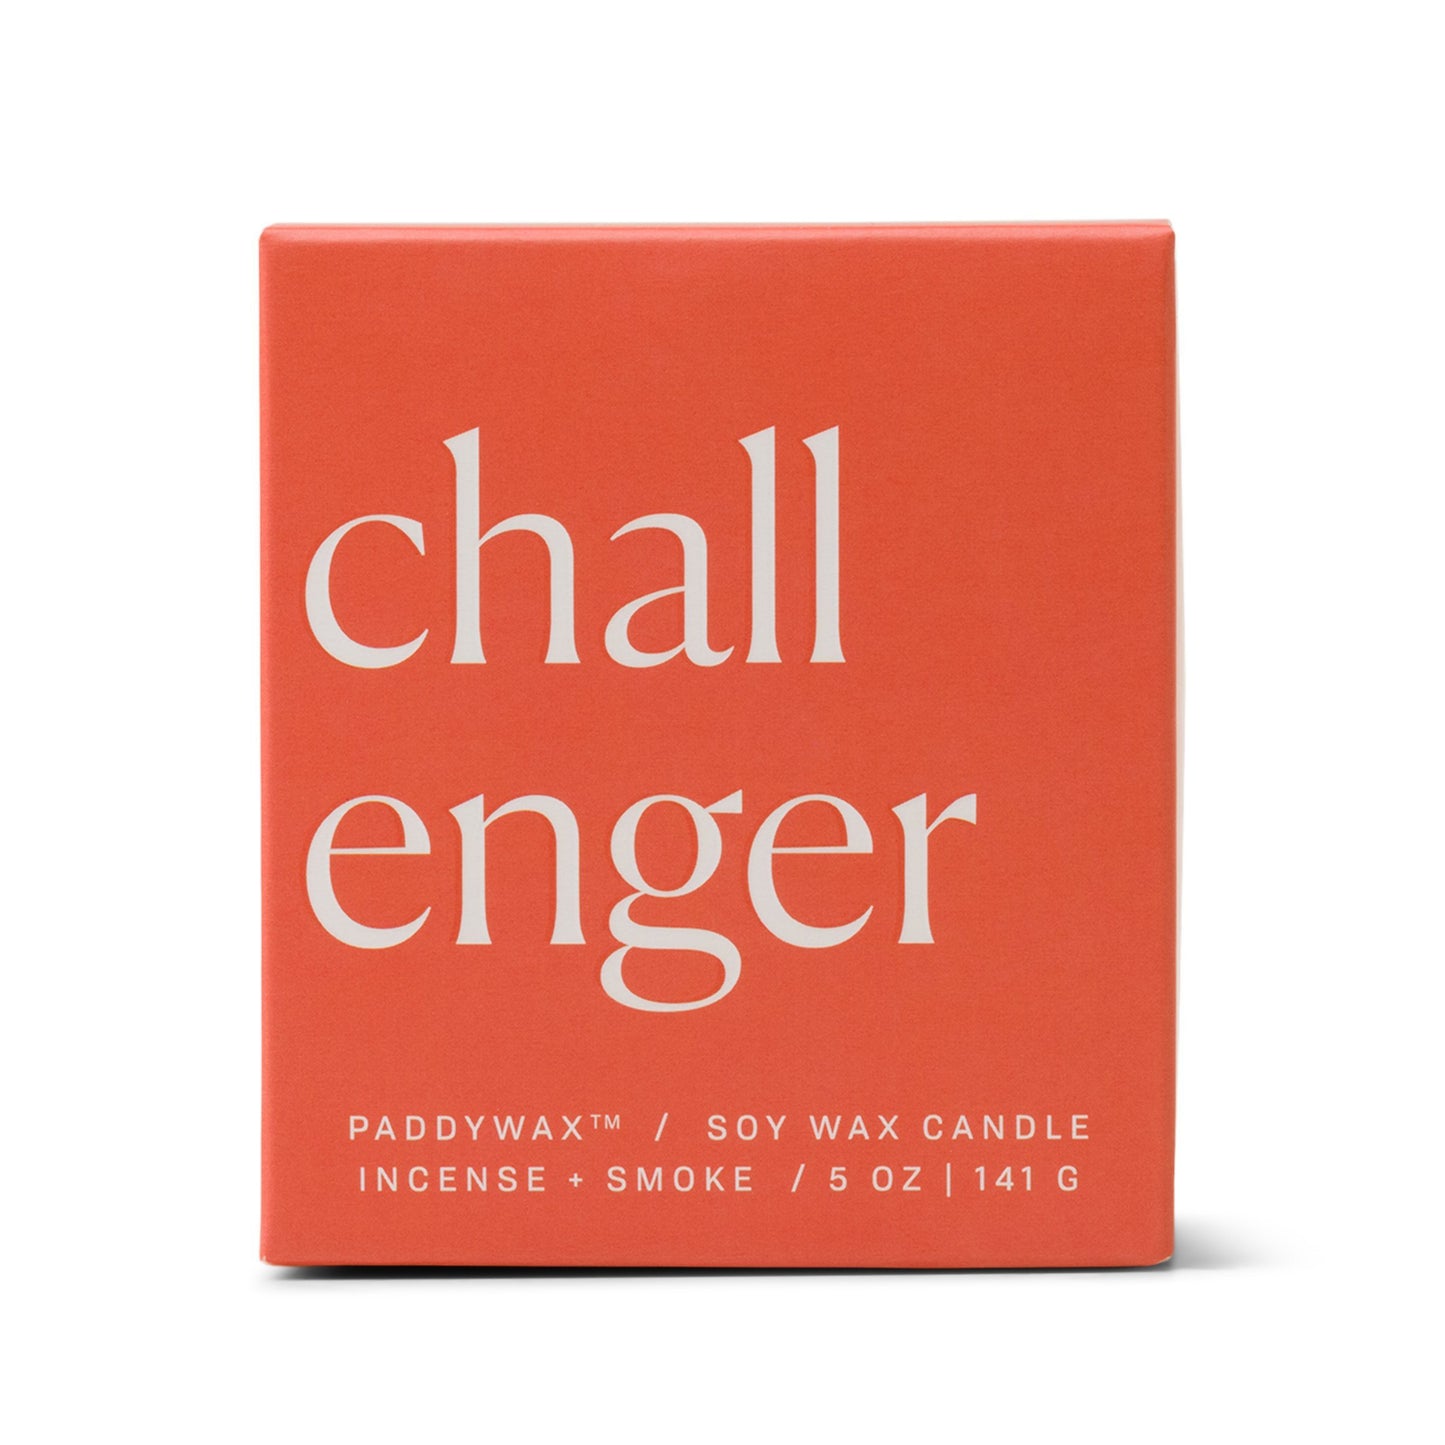 red-orange box which reads "challenger"; also has the number 8 printed on the side